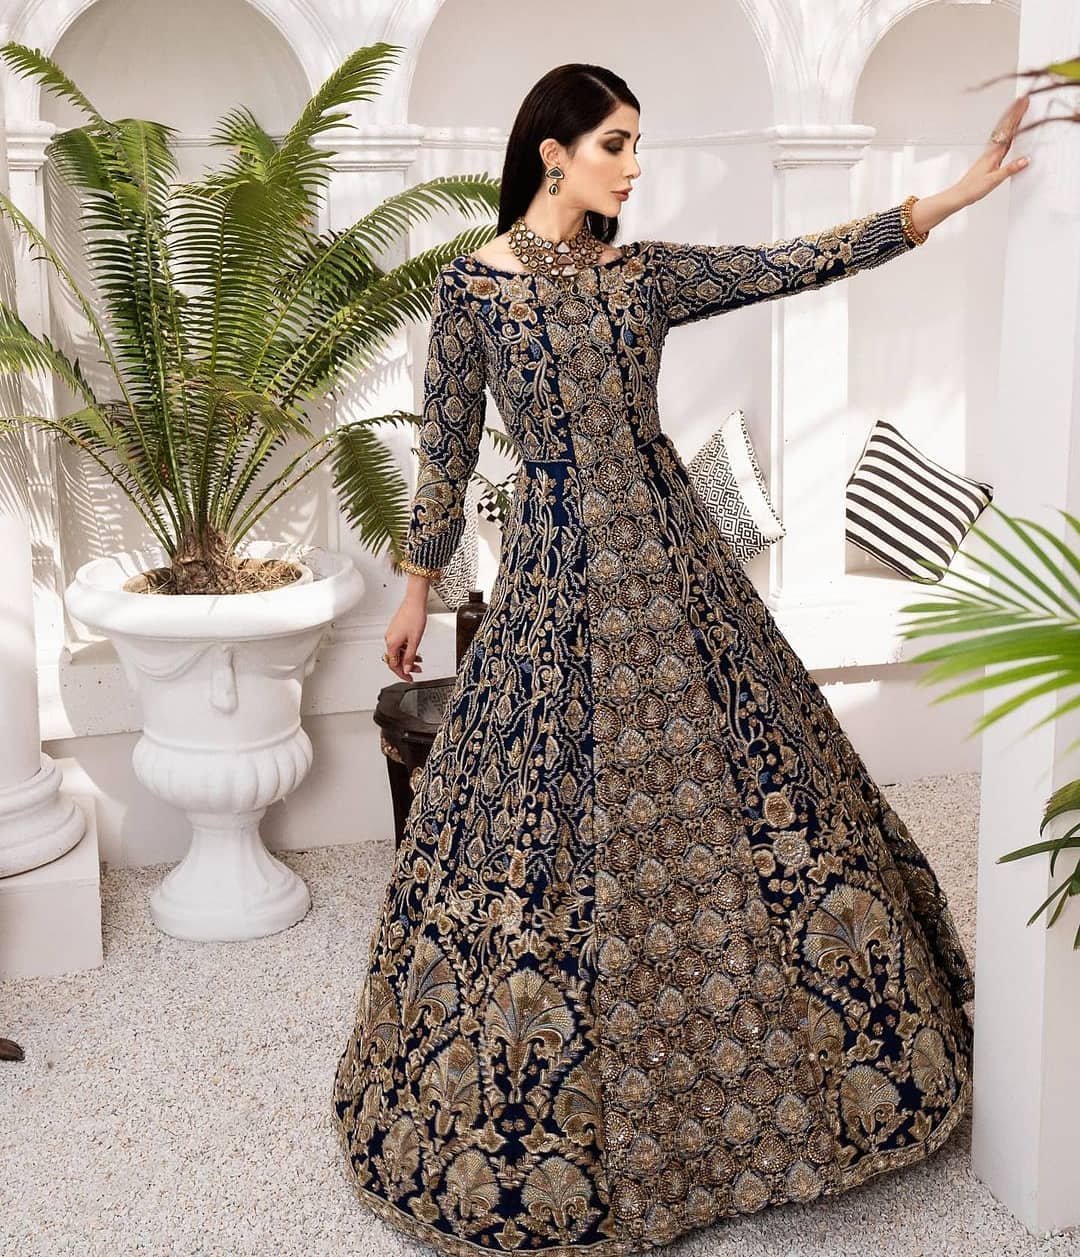 What is the most popular Indian wedding dress in the world? - Quora